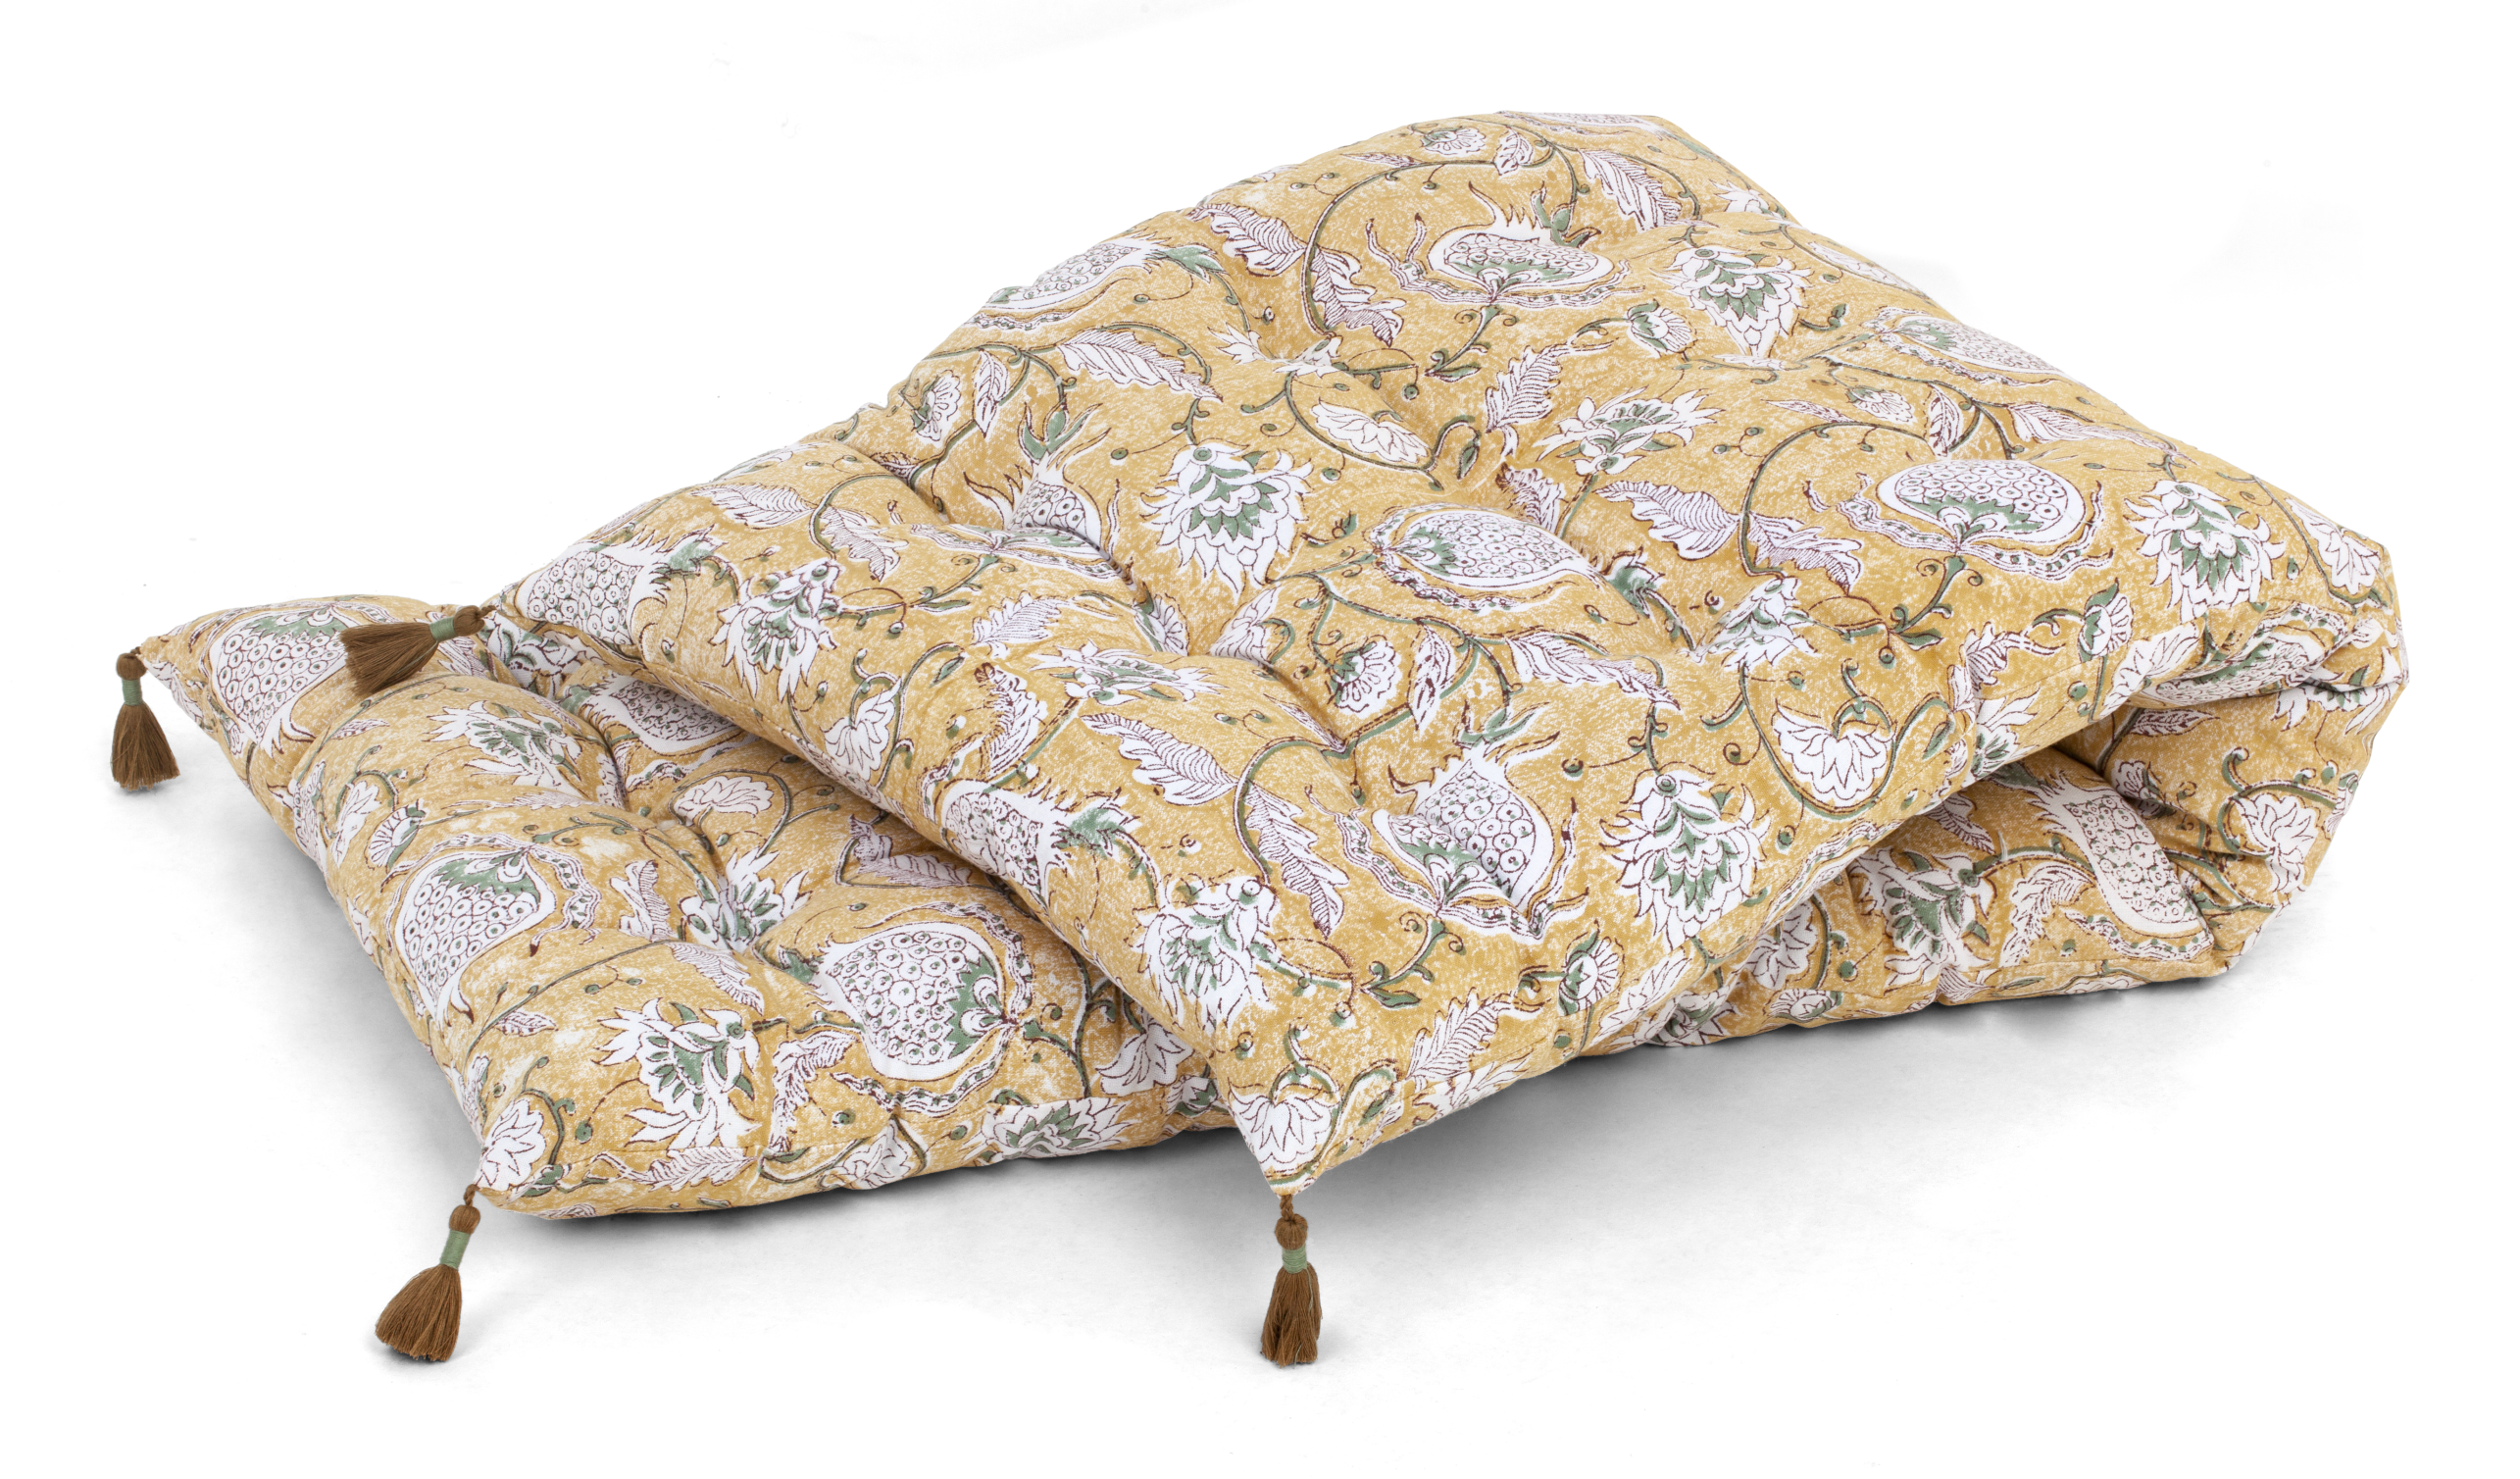 Long seat cushion with Pomegranate print in Ochre